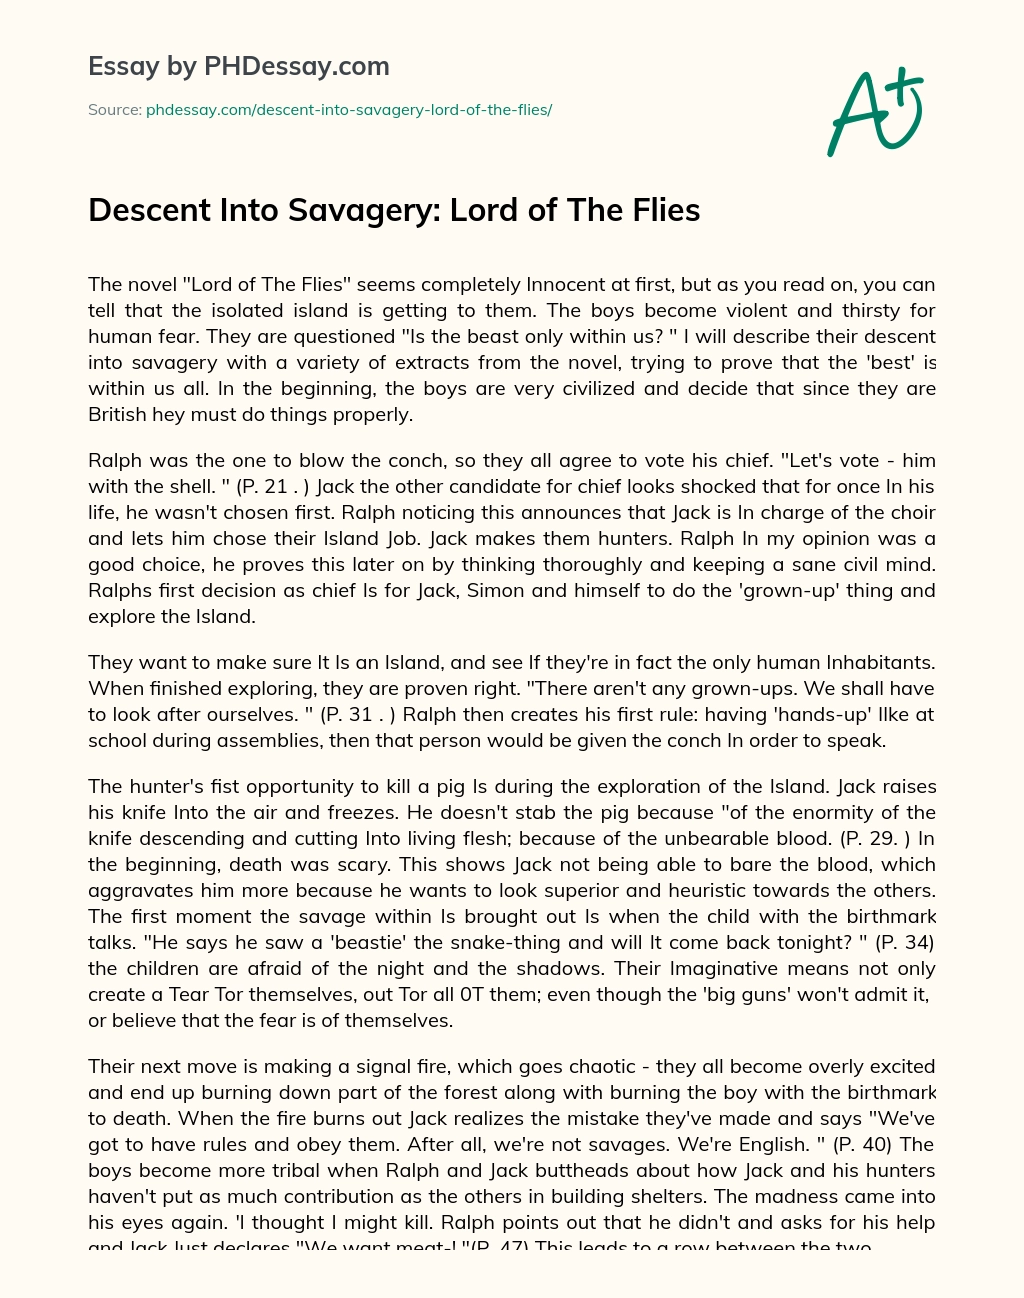 lord of the flies savagery essay